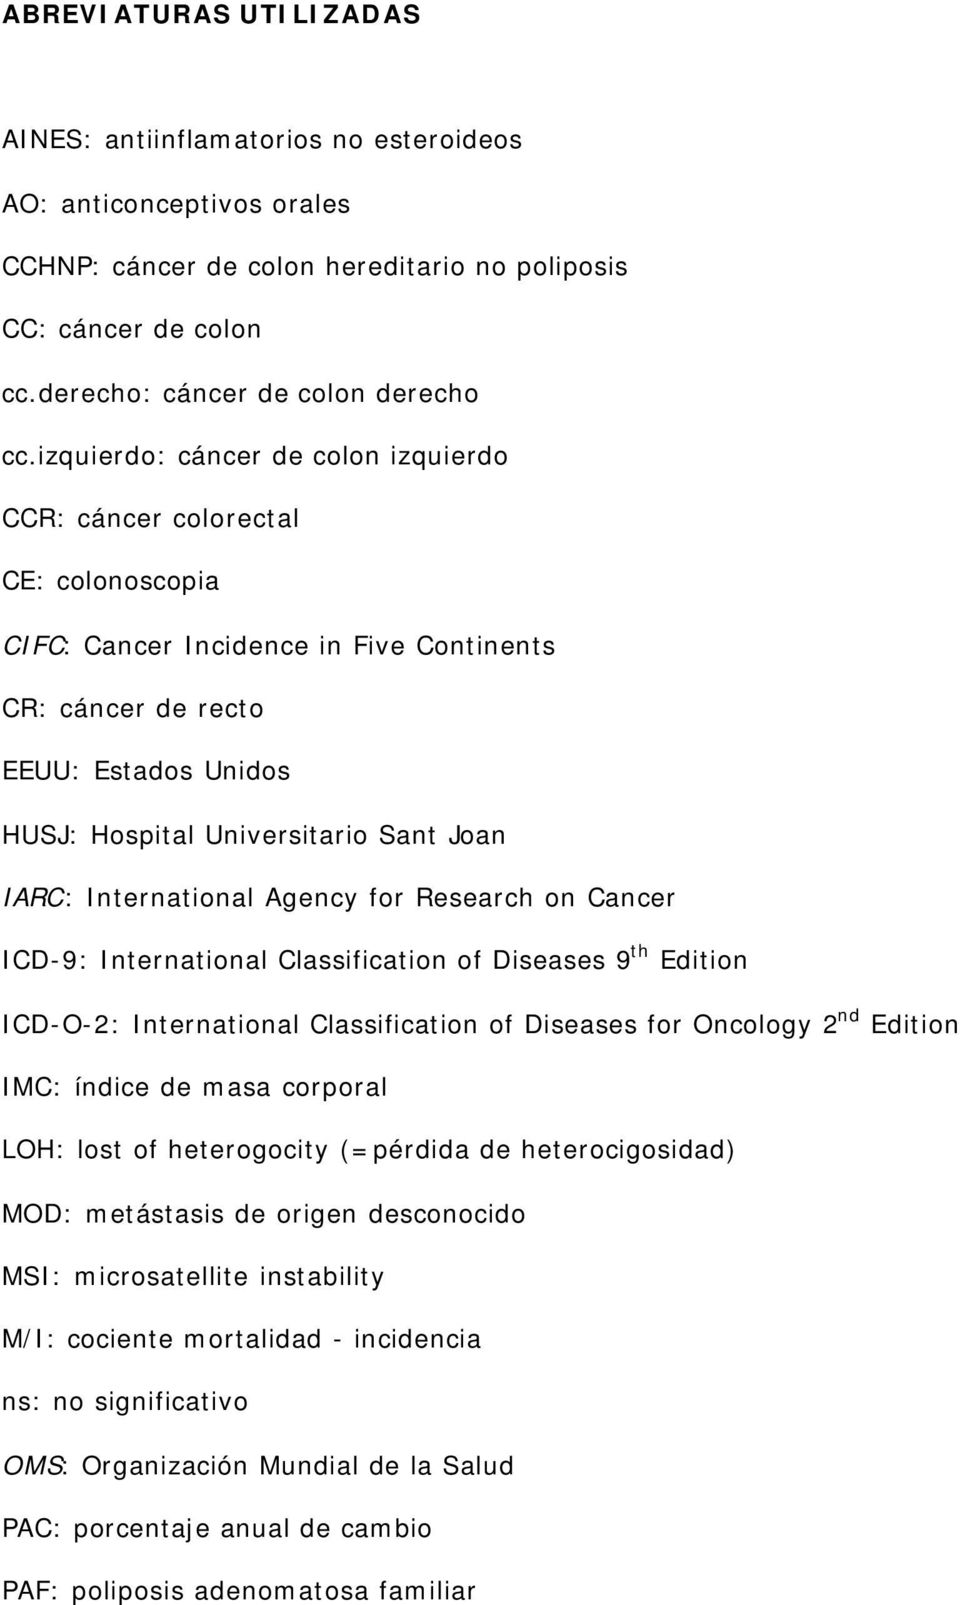 IARC: International Agency for Research on Cancer ICD-9: International Classification of Diseases 9 th Edition ICD-O-2: International Classification of Diseases for Oncology 2 nd Edition IMC: índice